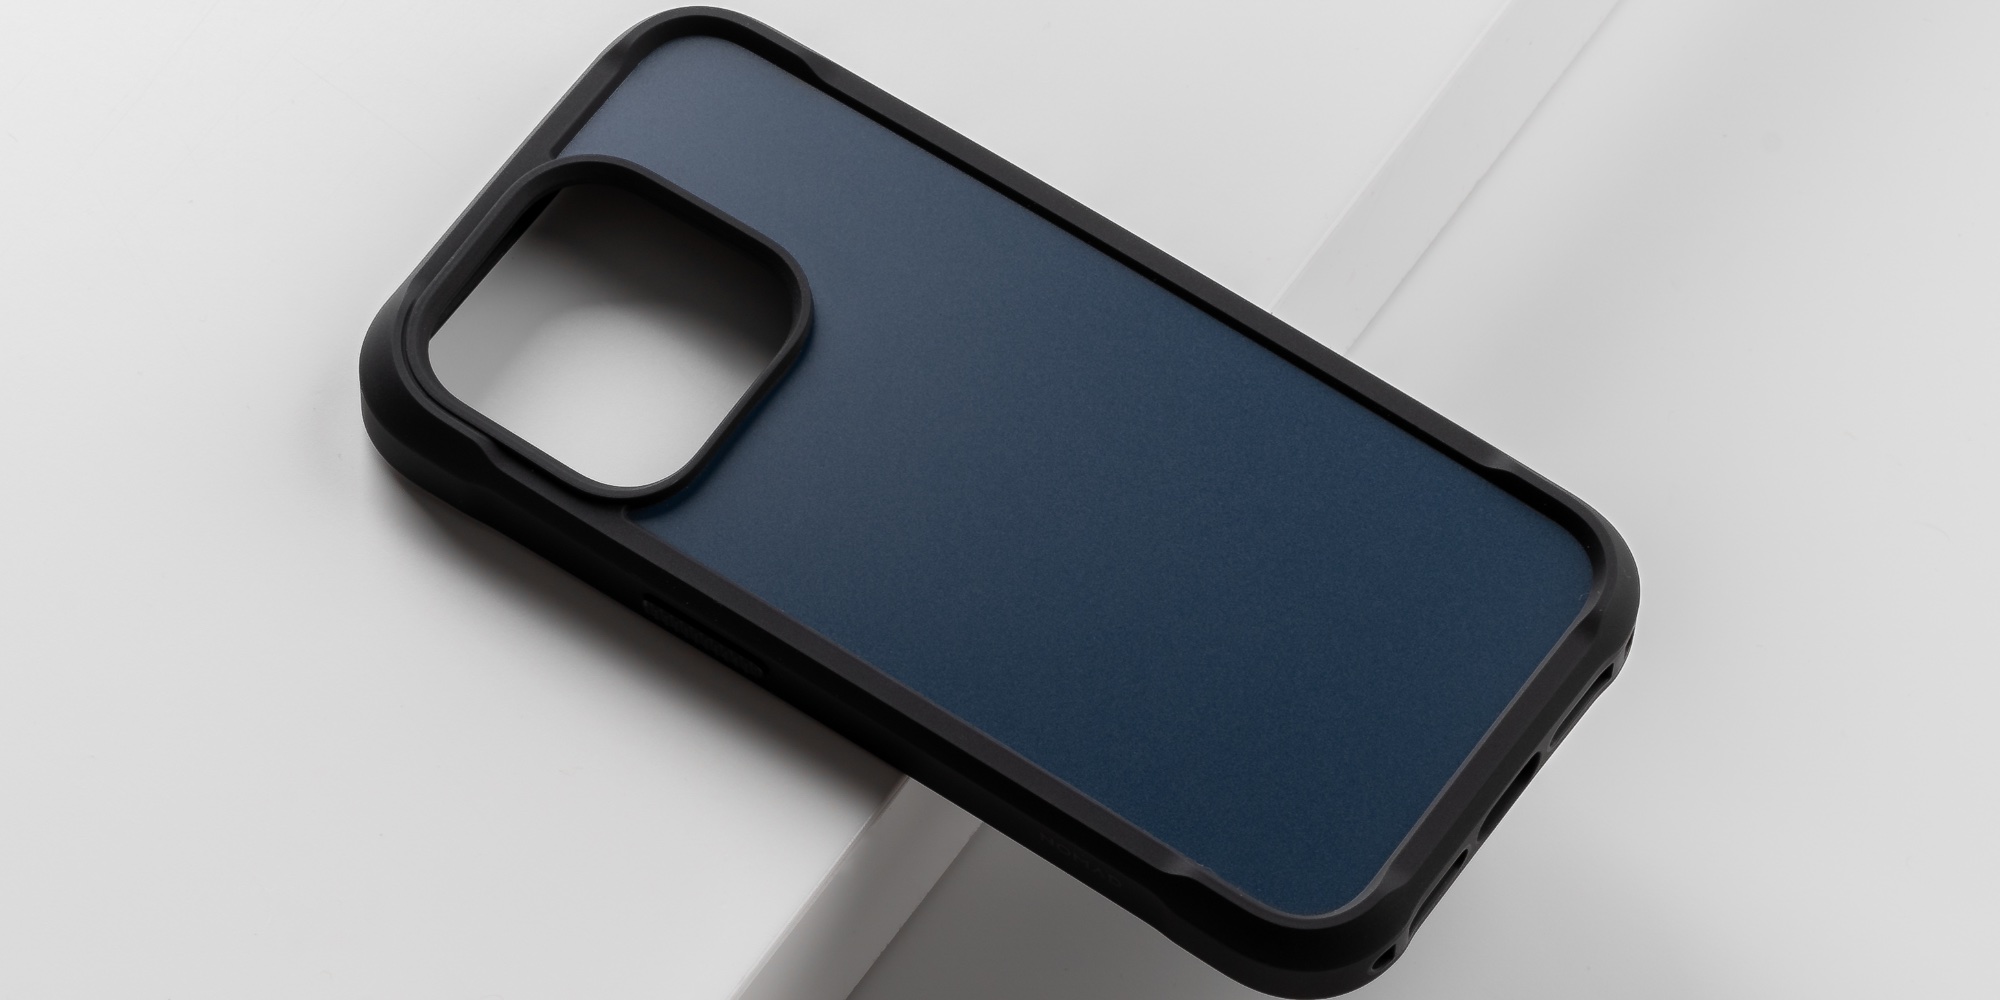 Nomad iPhone 15 cases debut with leather styles